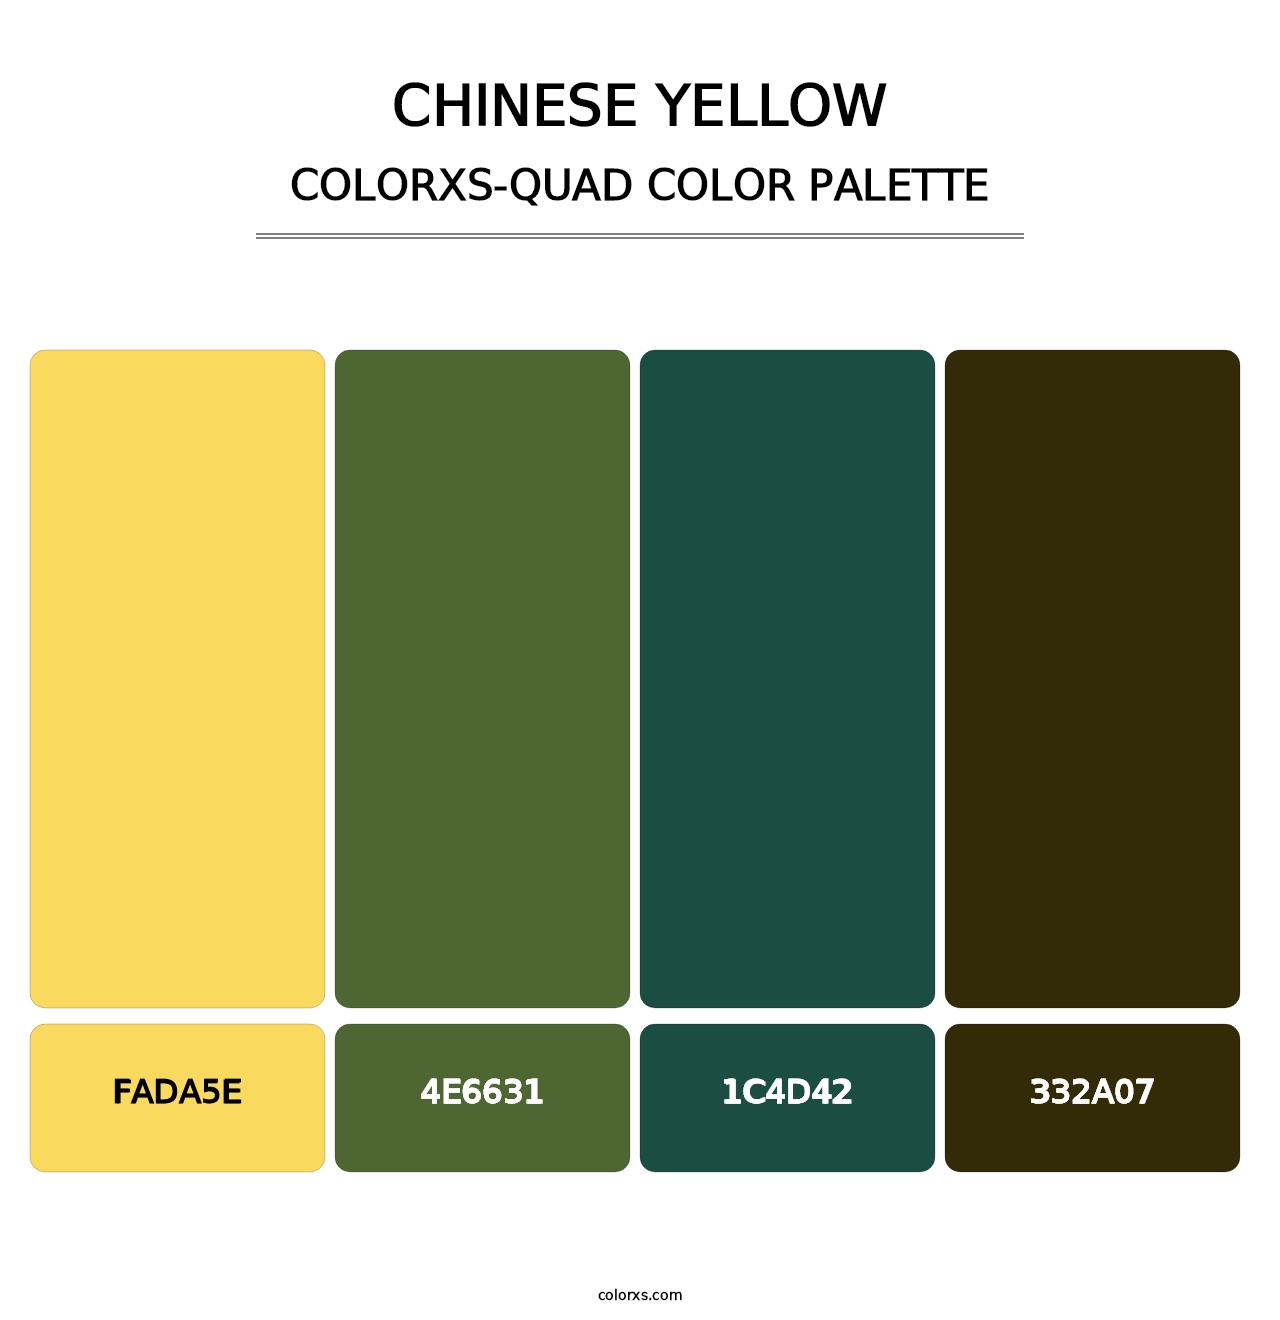 Chinese Yellow - Colorxs Quad Palette